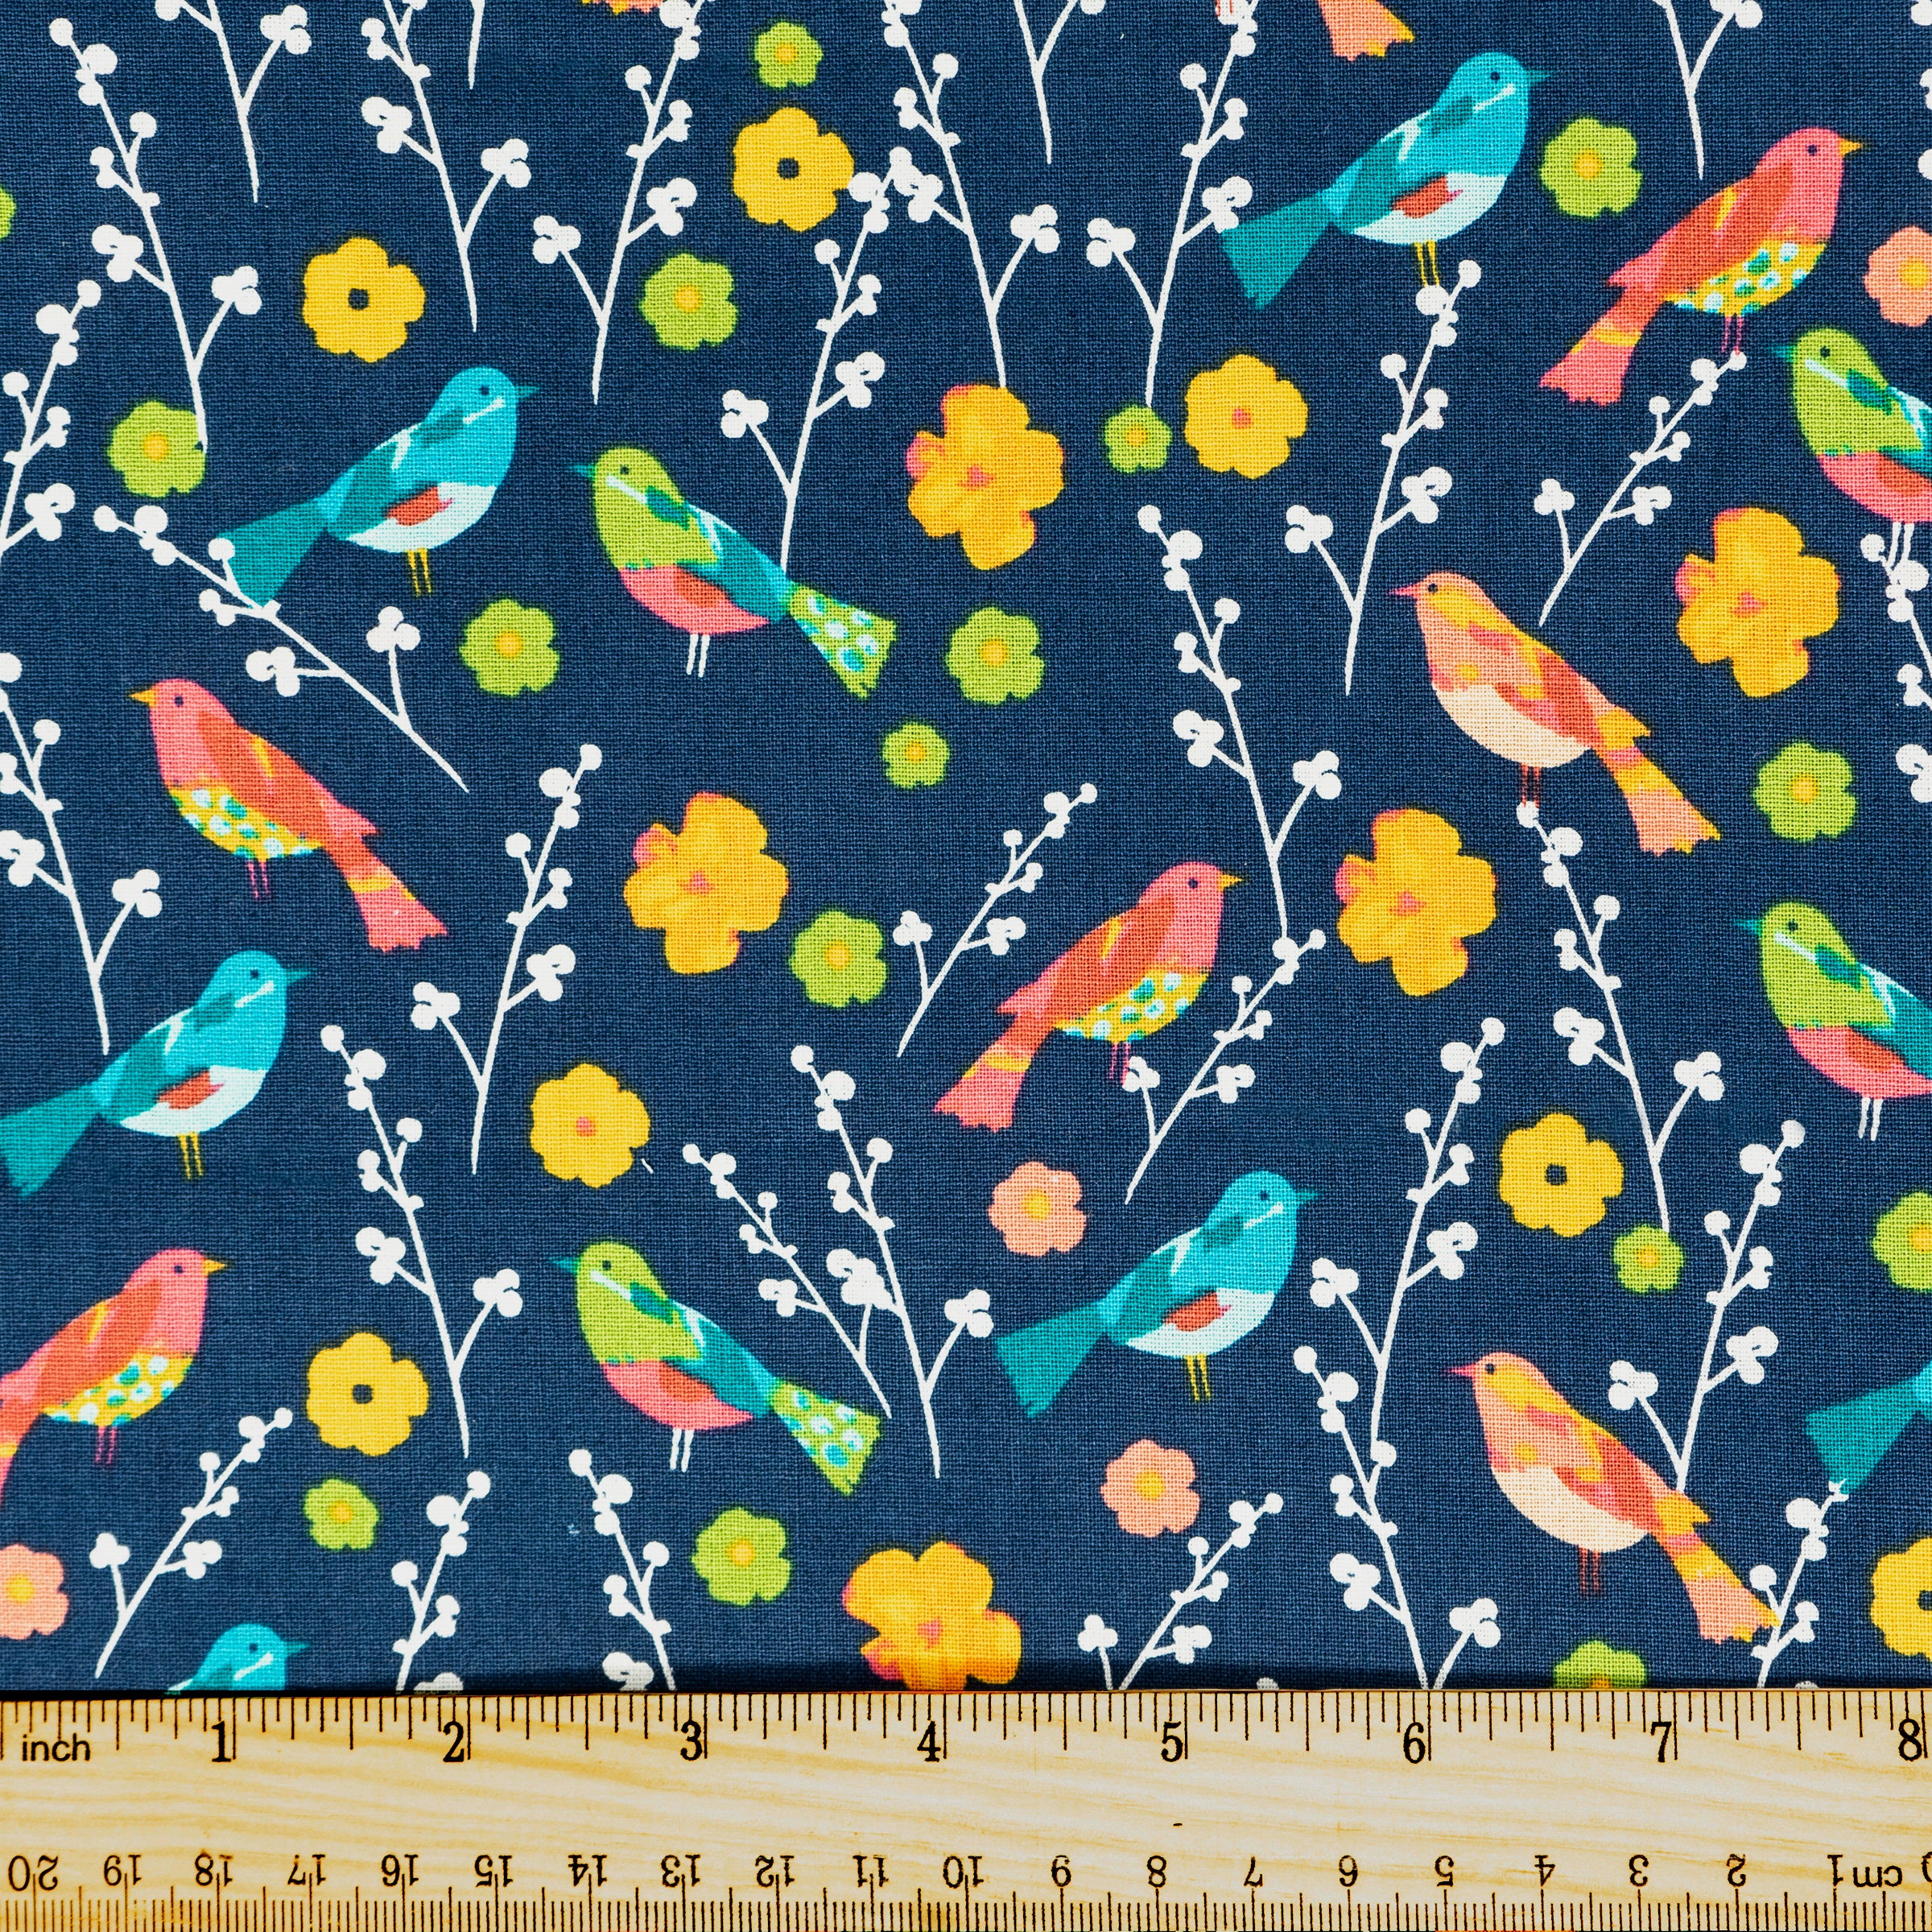 Waverly Inspirations 44" 100% Cotton Birds of Feather Sewing & Craft Fabric By the Yard, Multi-color